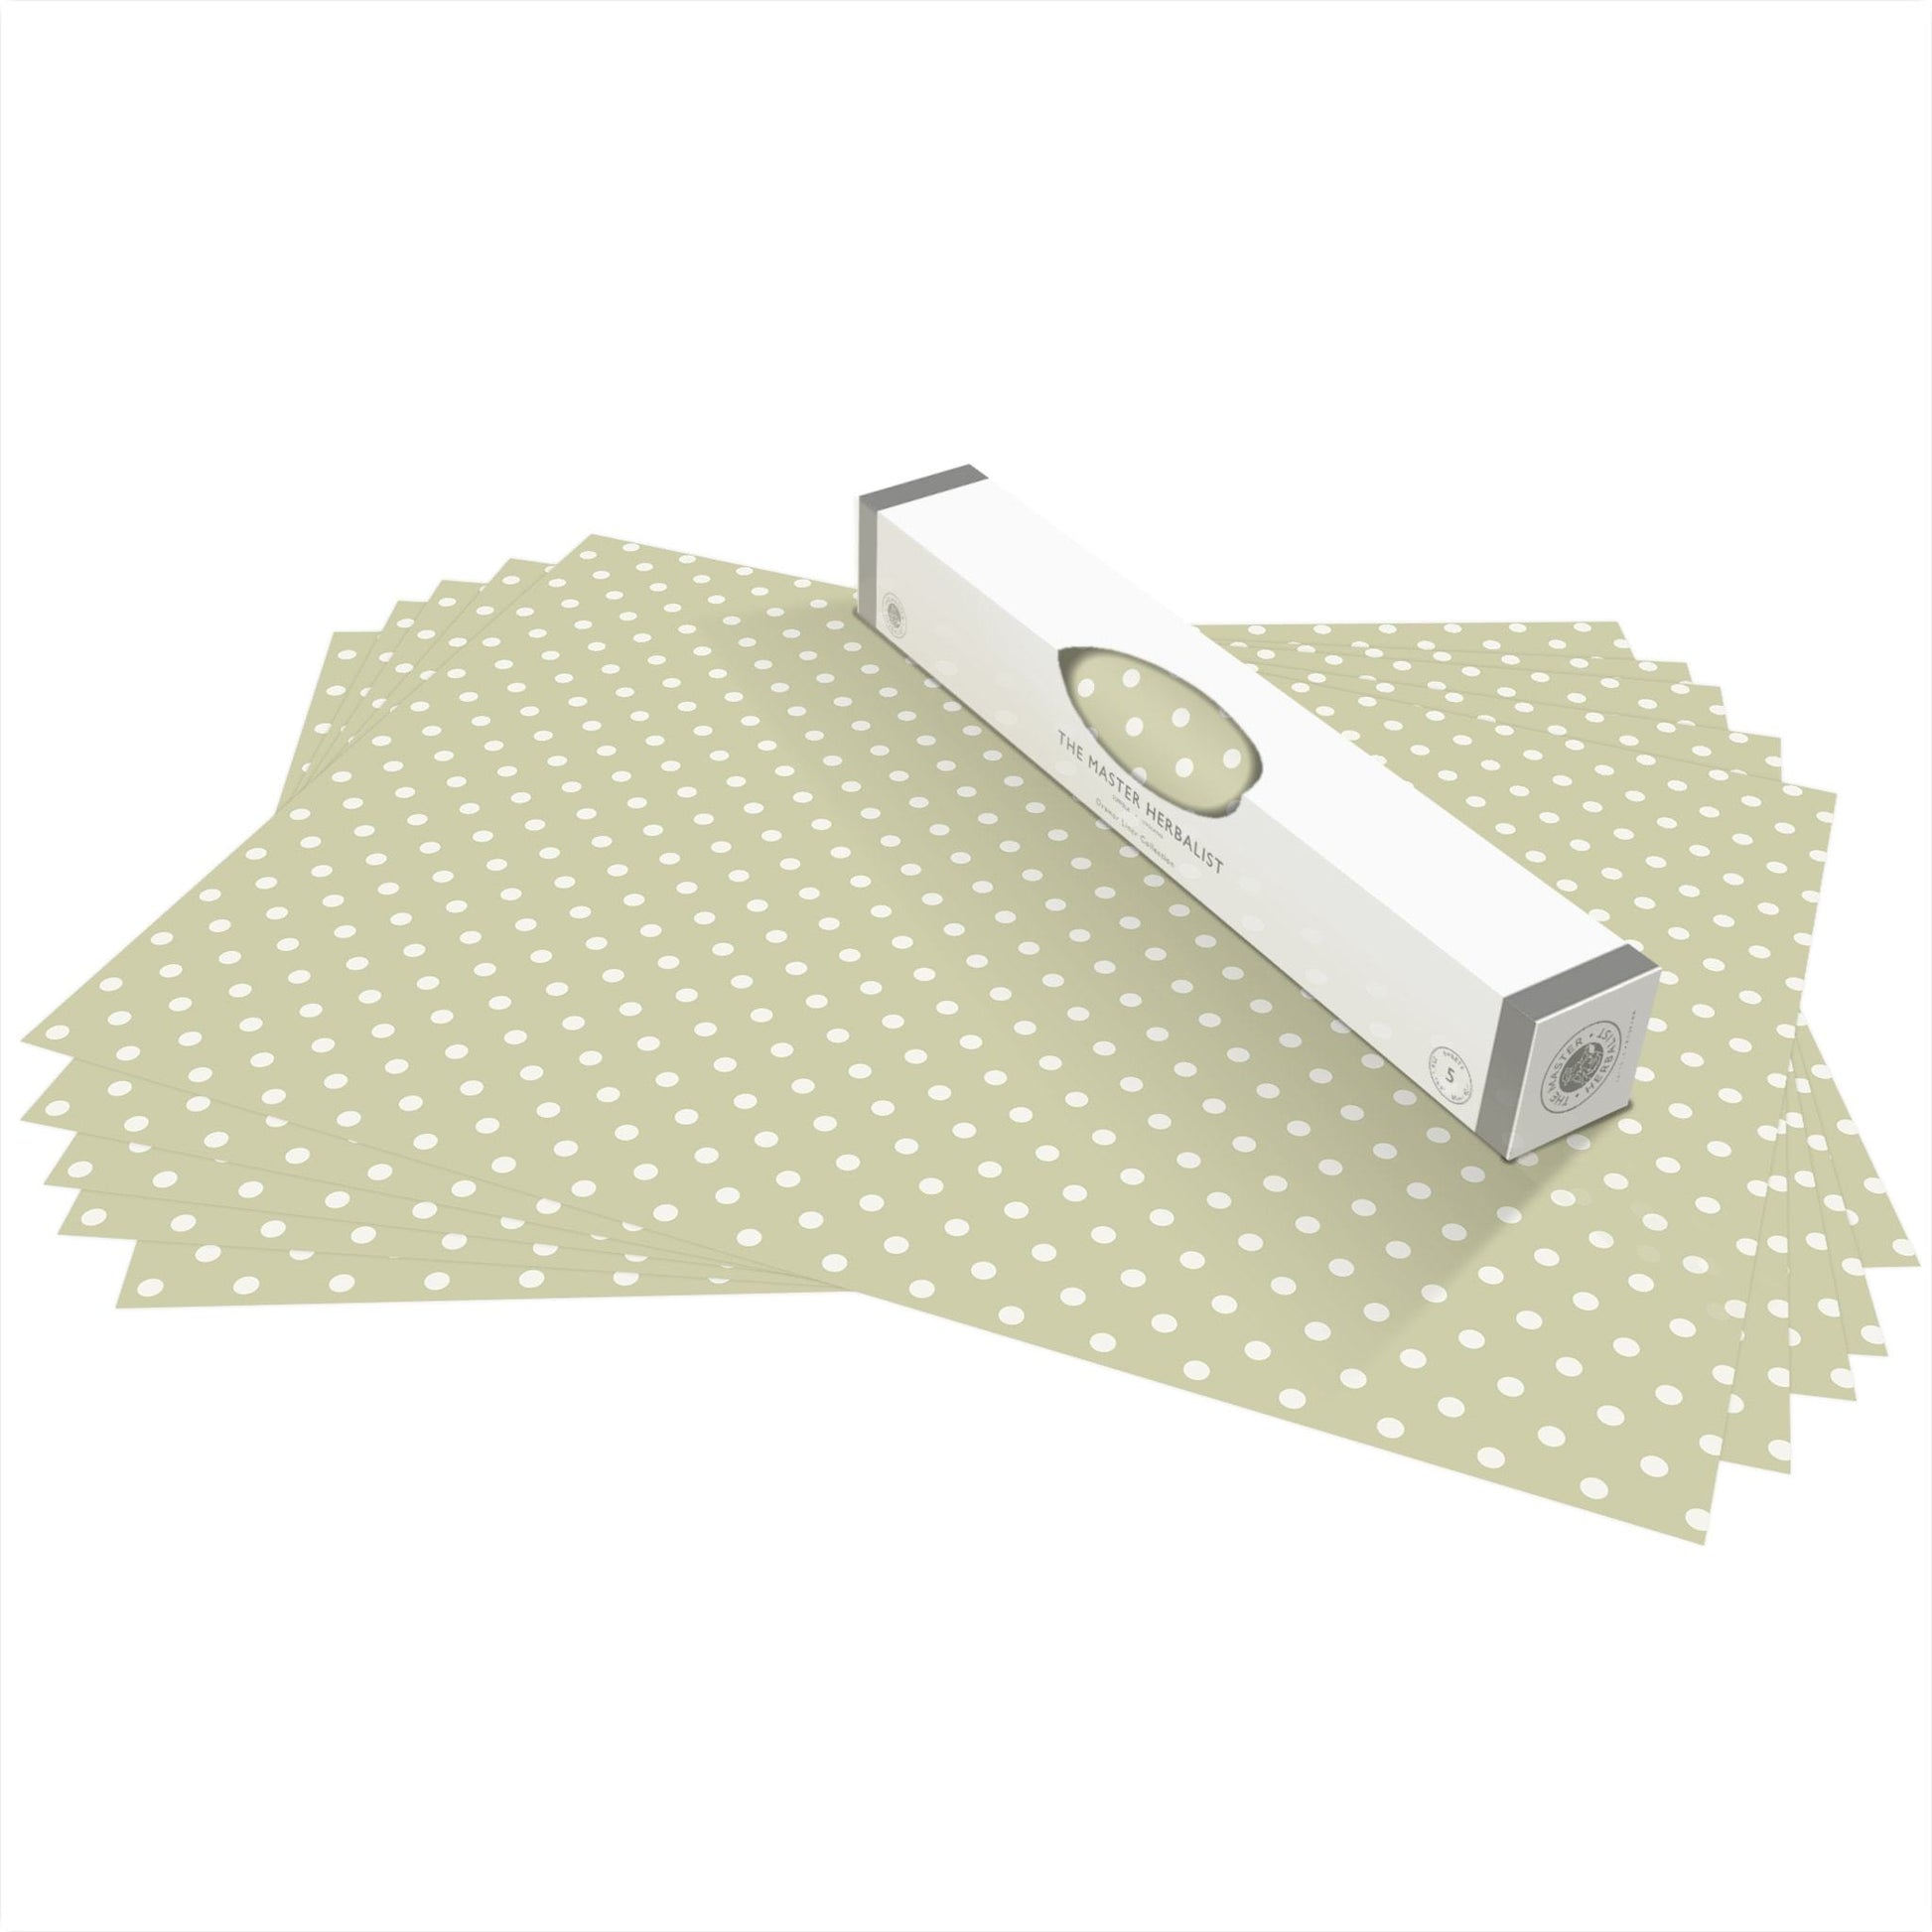 THE MASTER HERBALIST | Wipe Clean & Unscented Drawer Liners in a SAGE GREEN POLKA DOT Design. Perfect for Kitchen Drawers, Shelves, Cupboards & Cabinets. Made in Suffolk, England. (Sage Green)